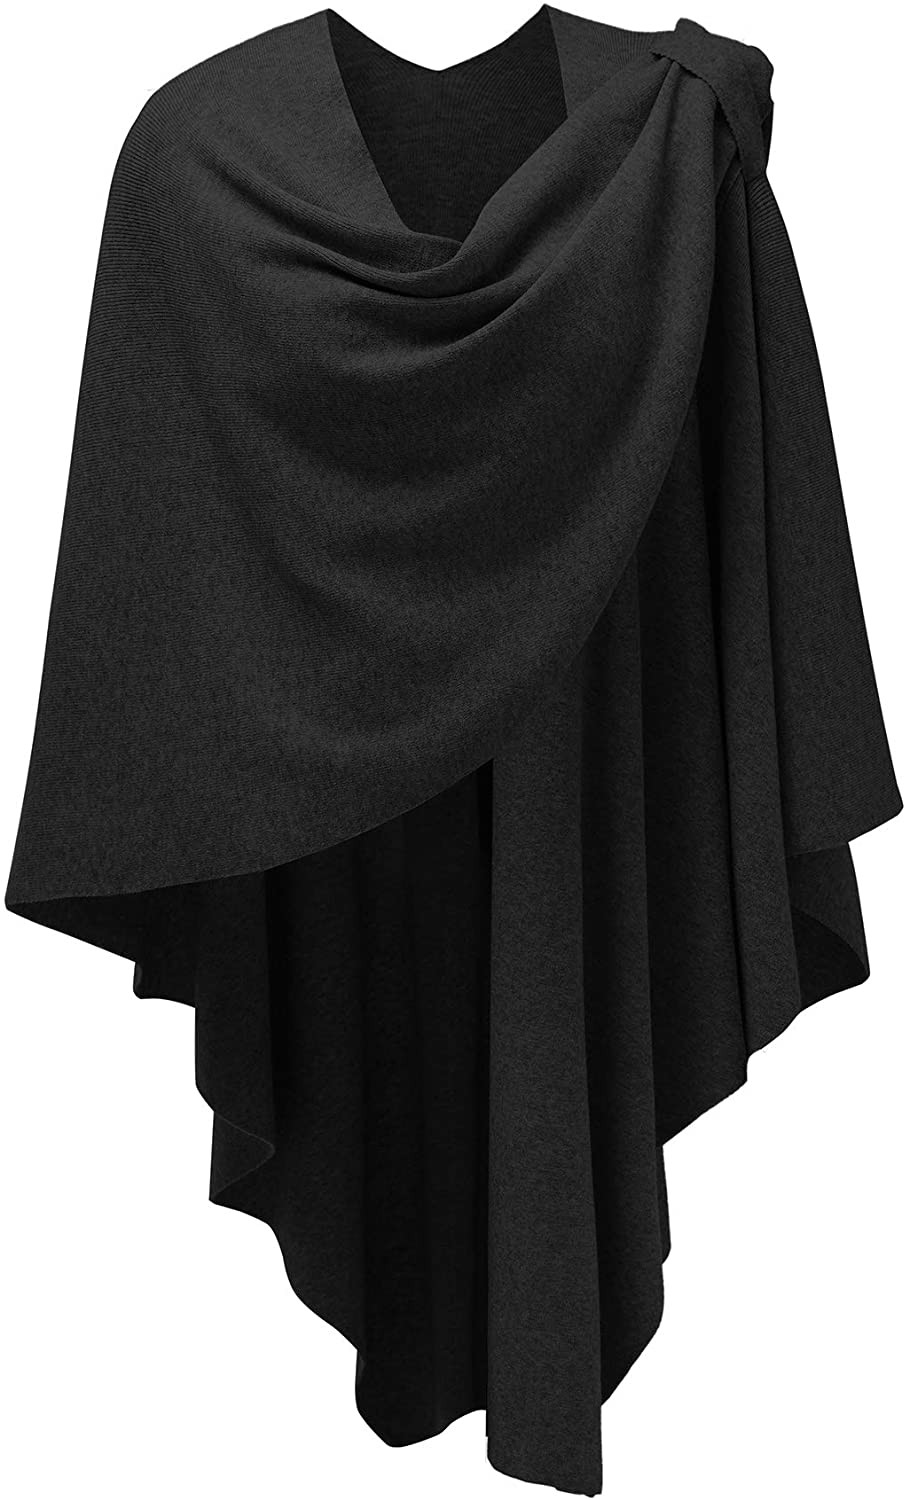 Womens Large Cross Front Poncho Sweater Plus Sized Wrap Topper for Cold Weather Air Conditioned Places 